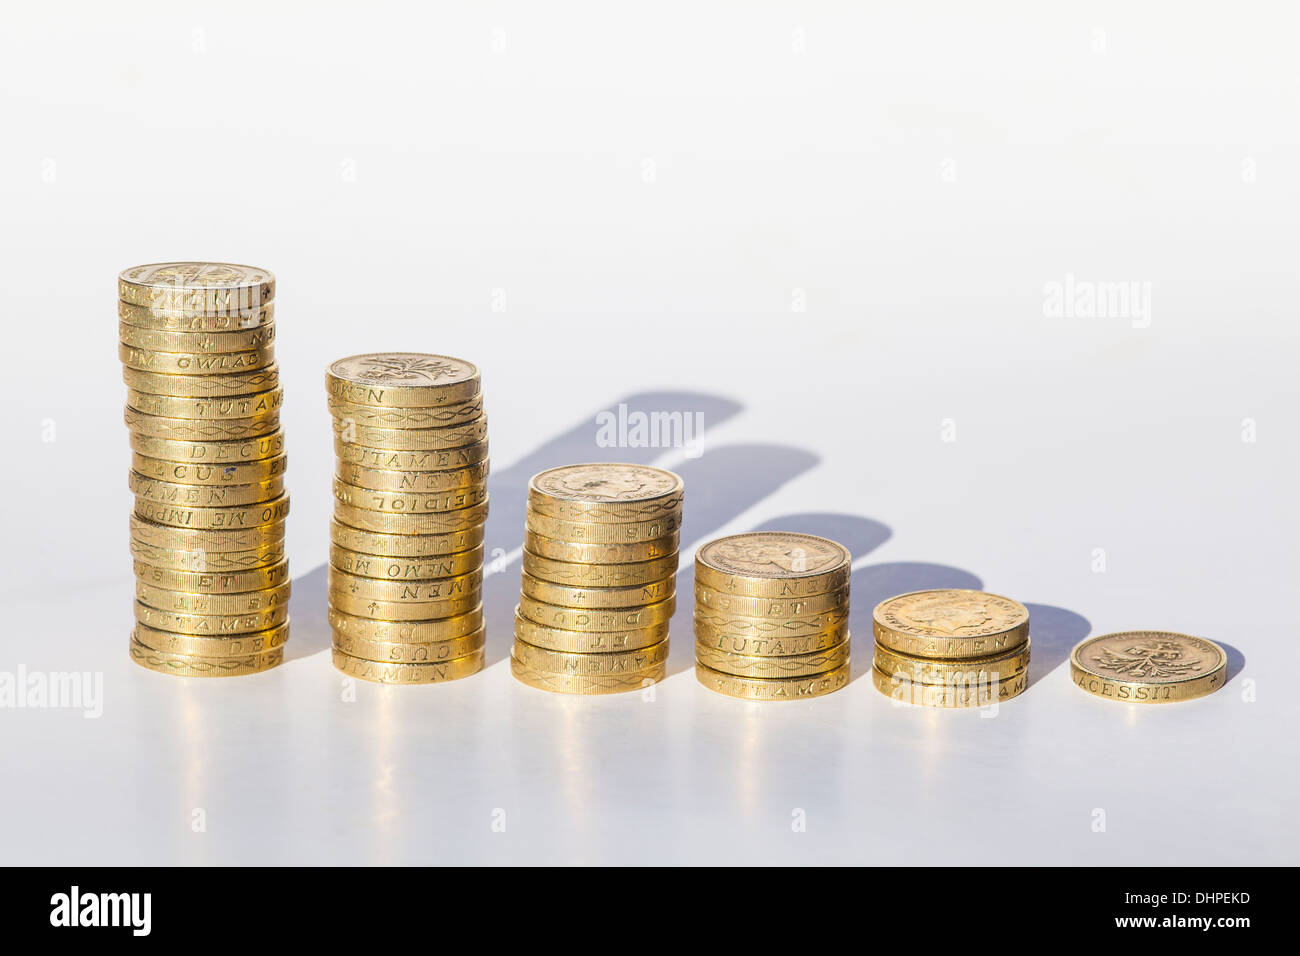 Pound coins arranged in steps Stock Photo